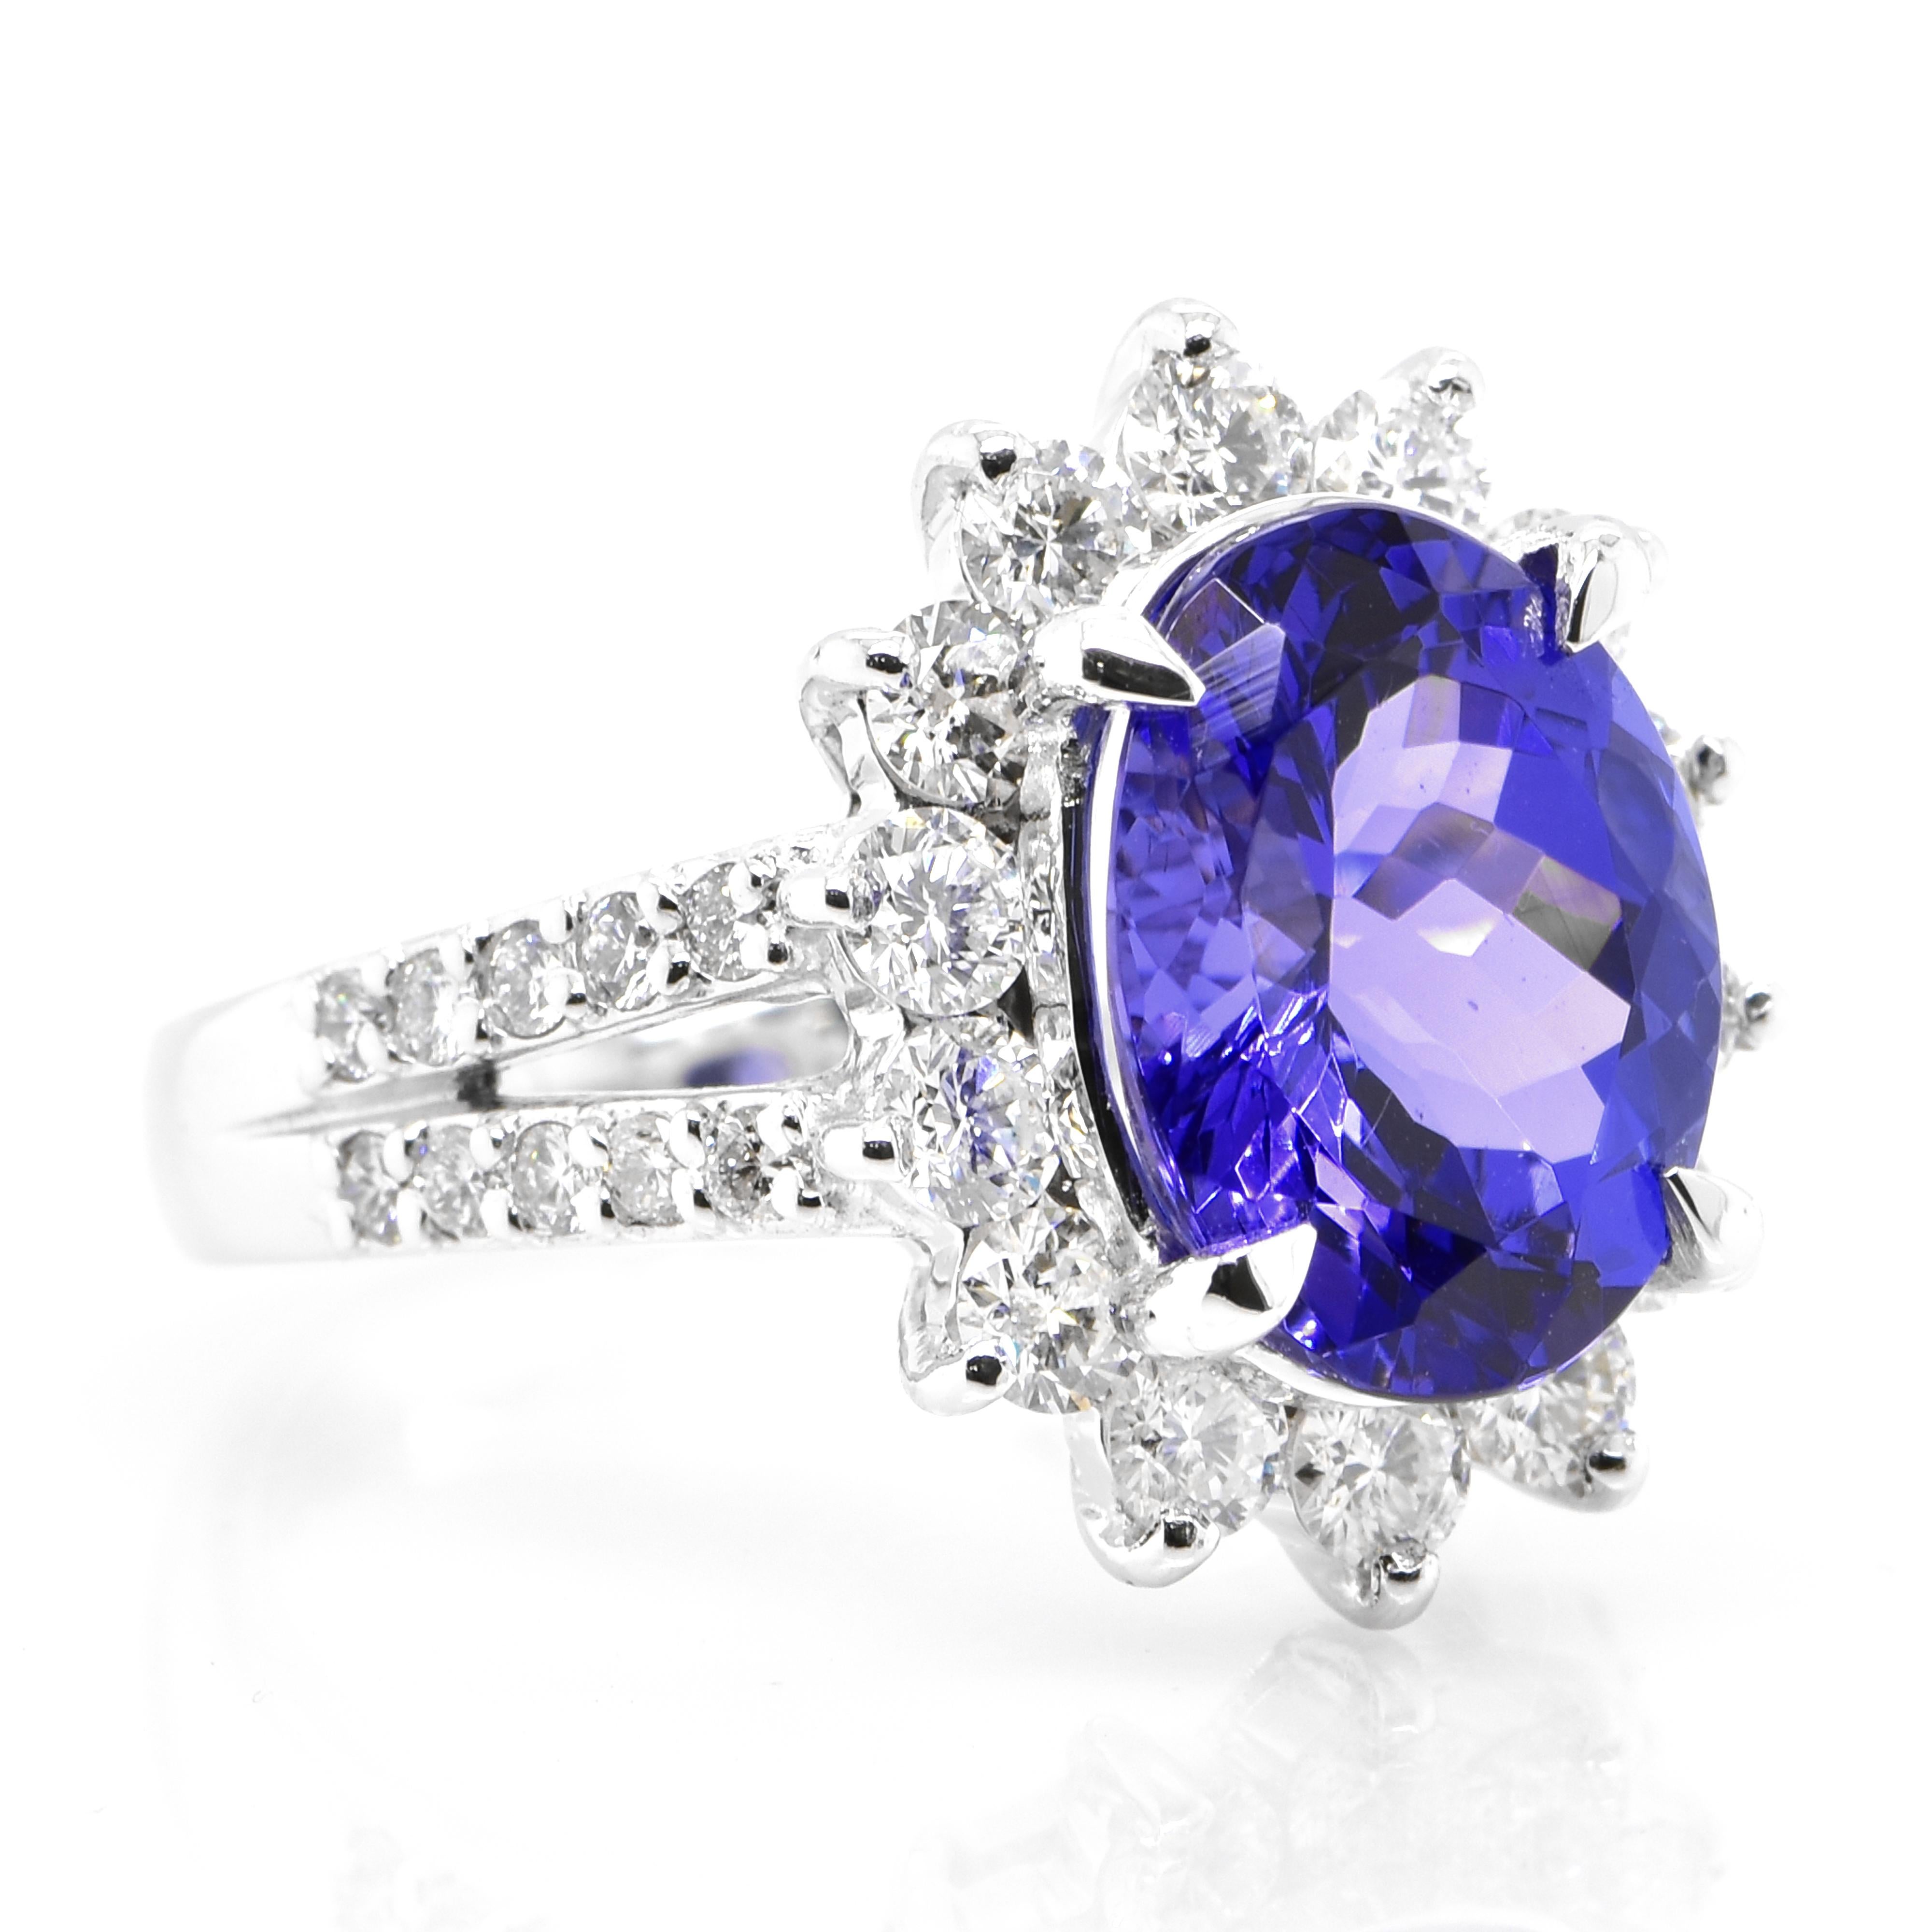 Oval Cut 4.75 Carat Natural Tanzanite and Diamond Cocktail Ring Set in Platinum For Sale